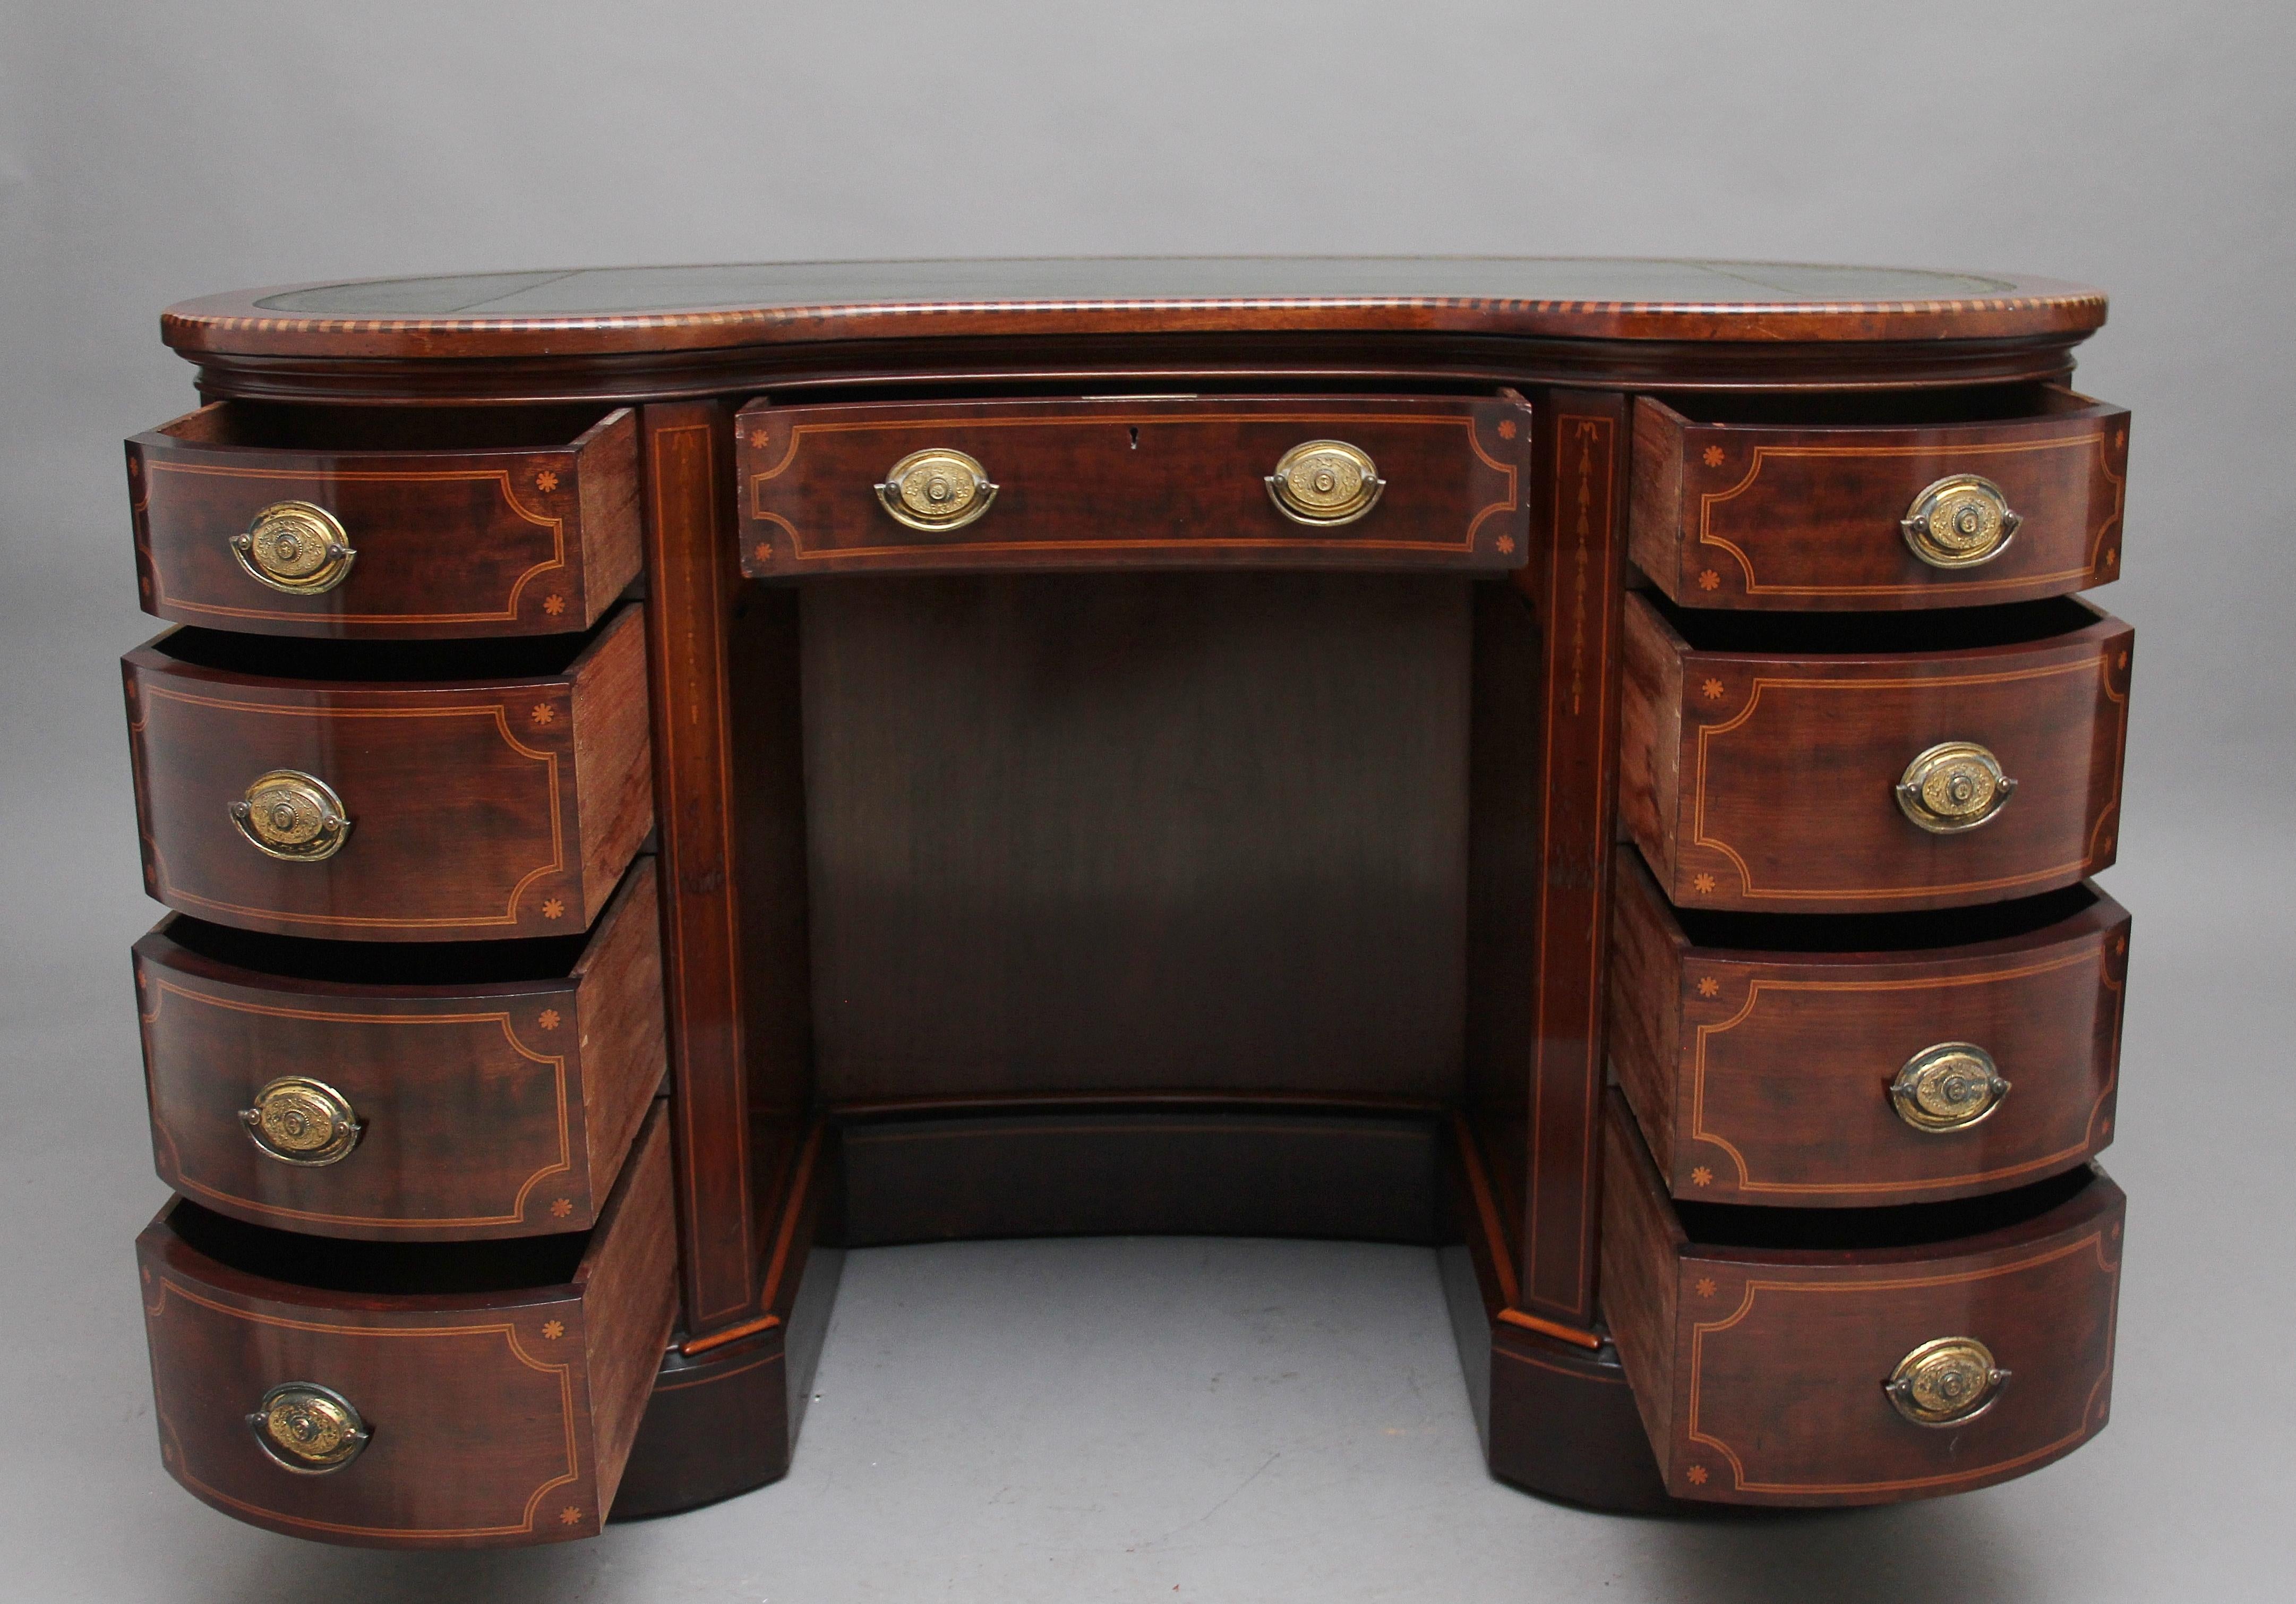 A superb quality 19th century freestanding inlaid mahogany kidney shaped desk, the top having the original green leather writing surface decorated with blind and gold tooling, the edge of the top having boxwood and chequered inlay, a selection of